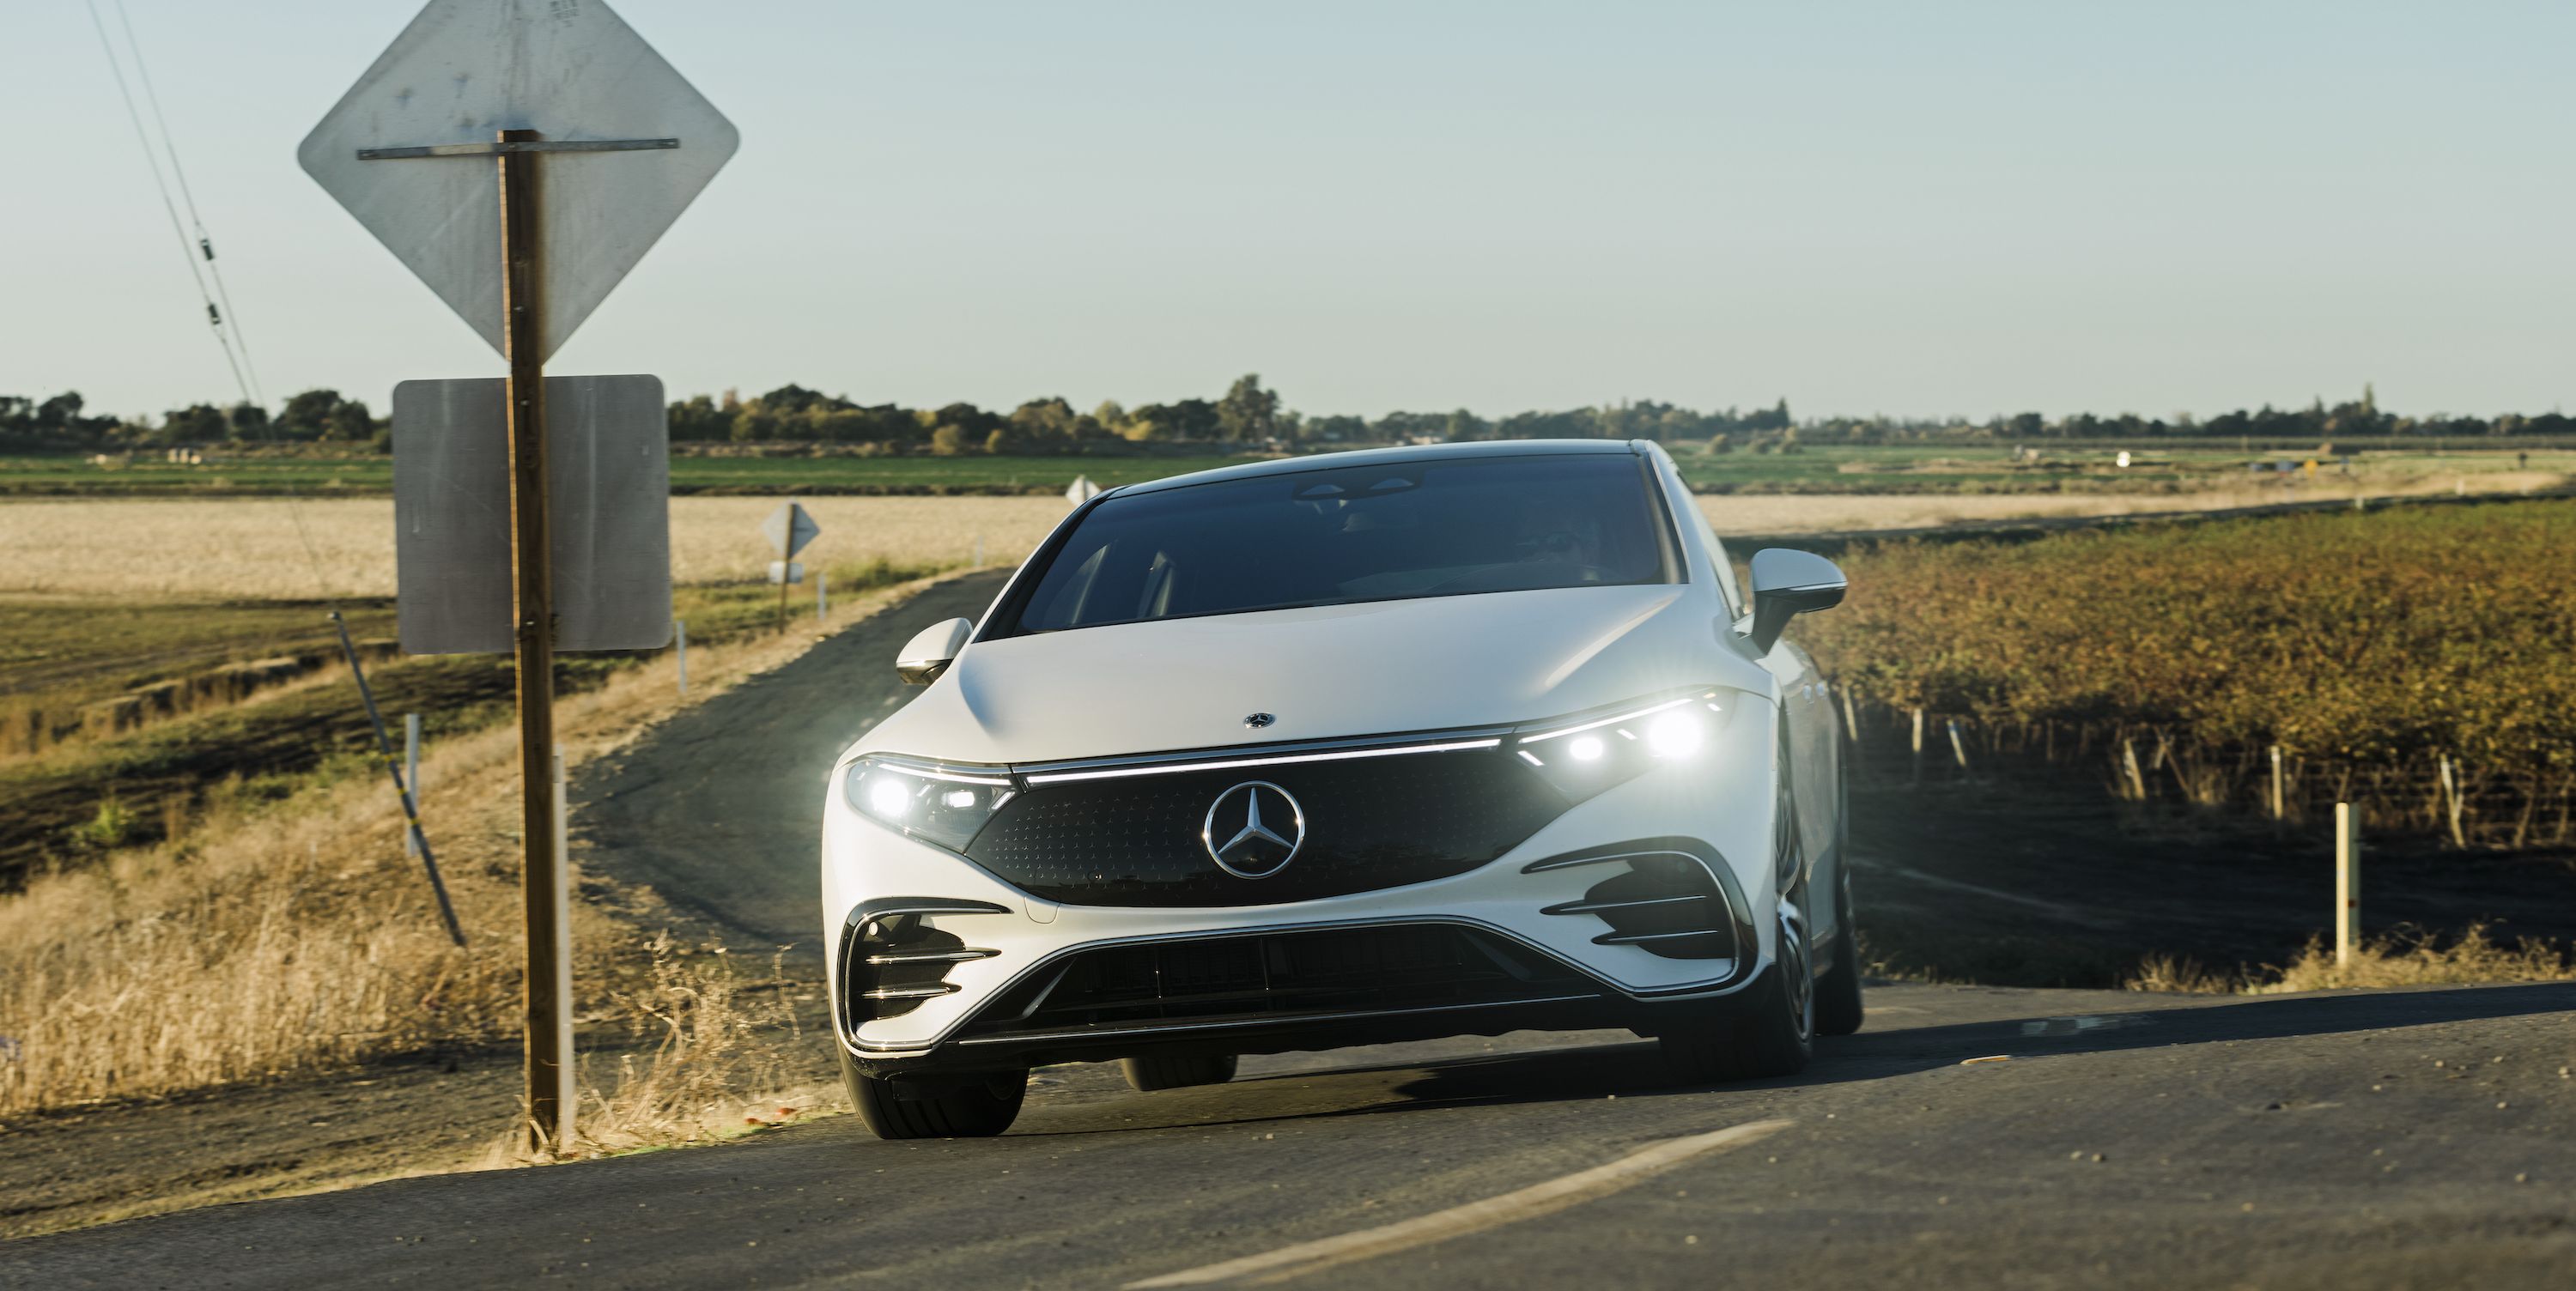 Mercedes Will Make Your EV Quicker. . .  If You Pay $1200 a Year